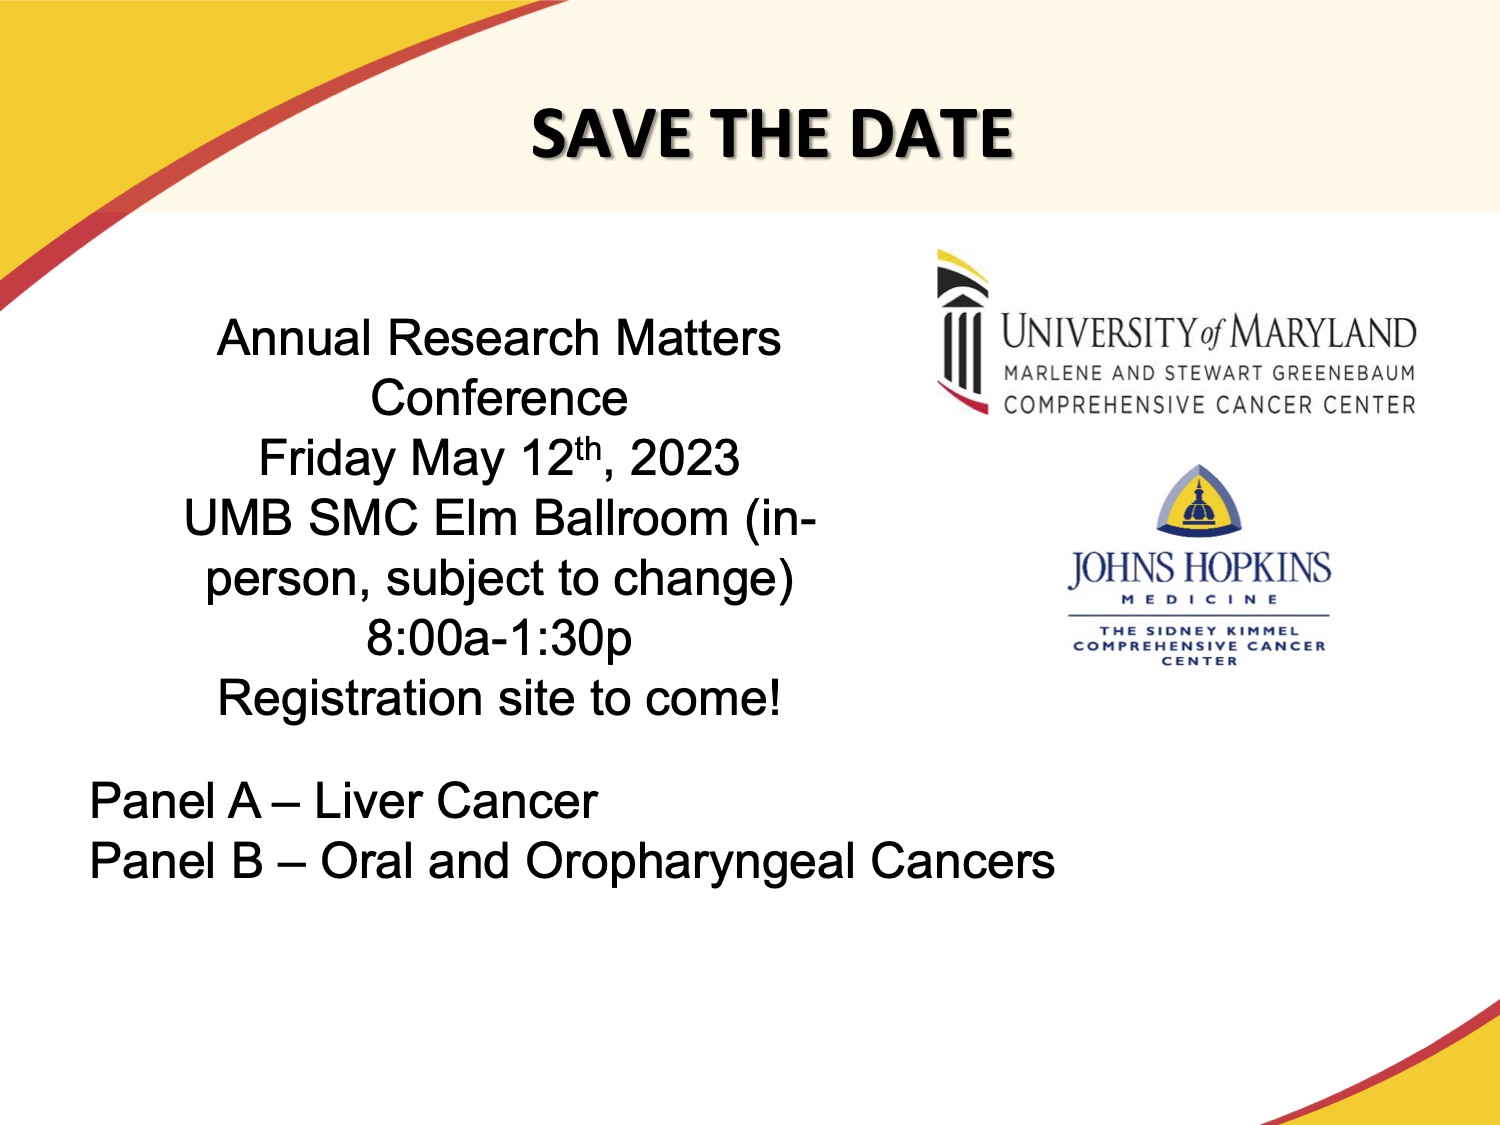 Save the date announcement for Annual Research Matters Conference on May 12, 2023, held by UMGCCC and JHU. Registration site to come